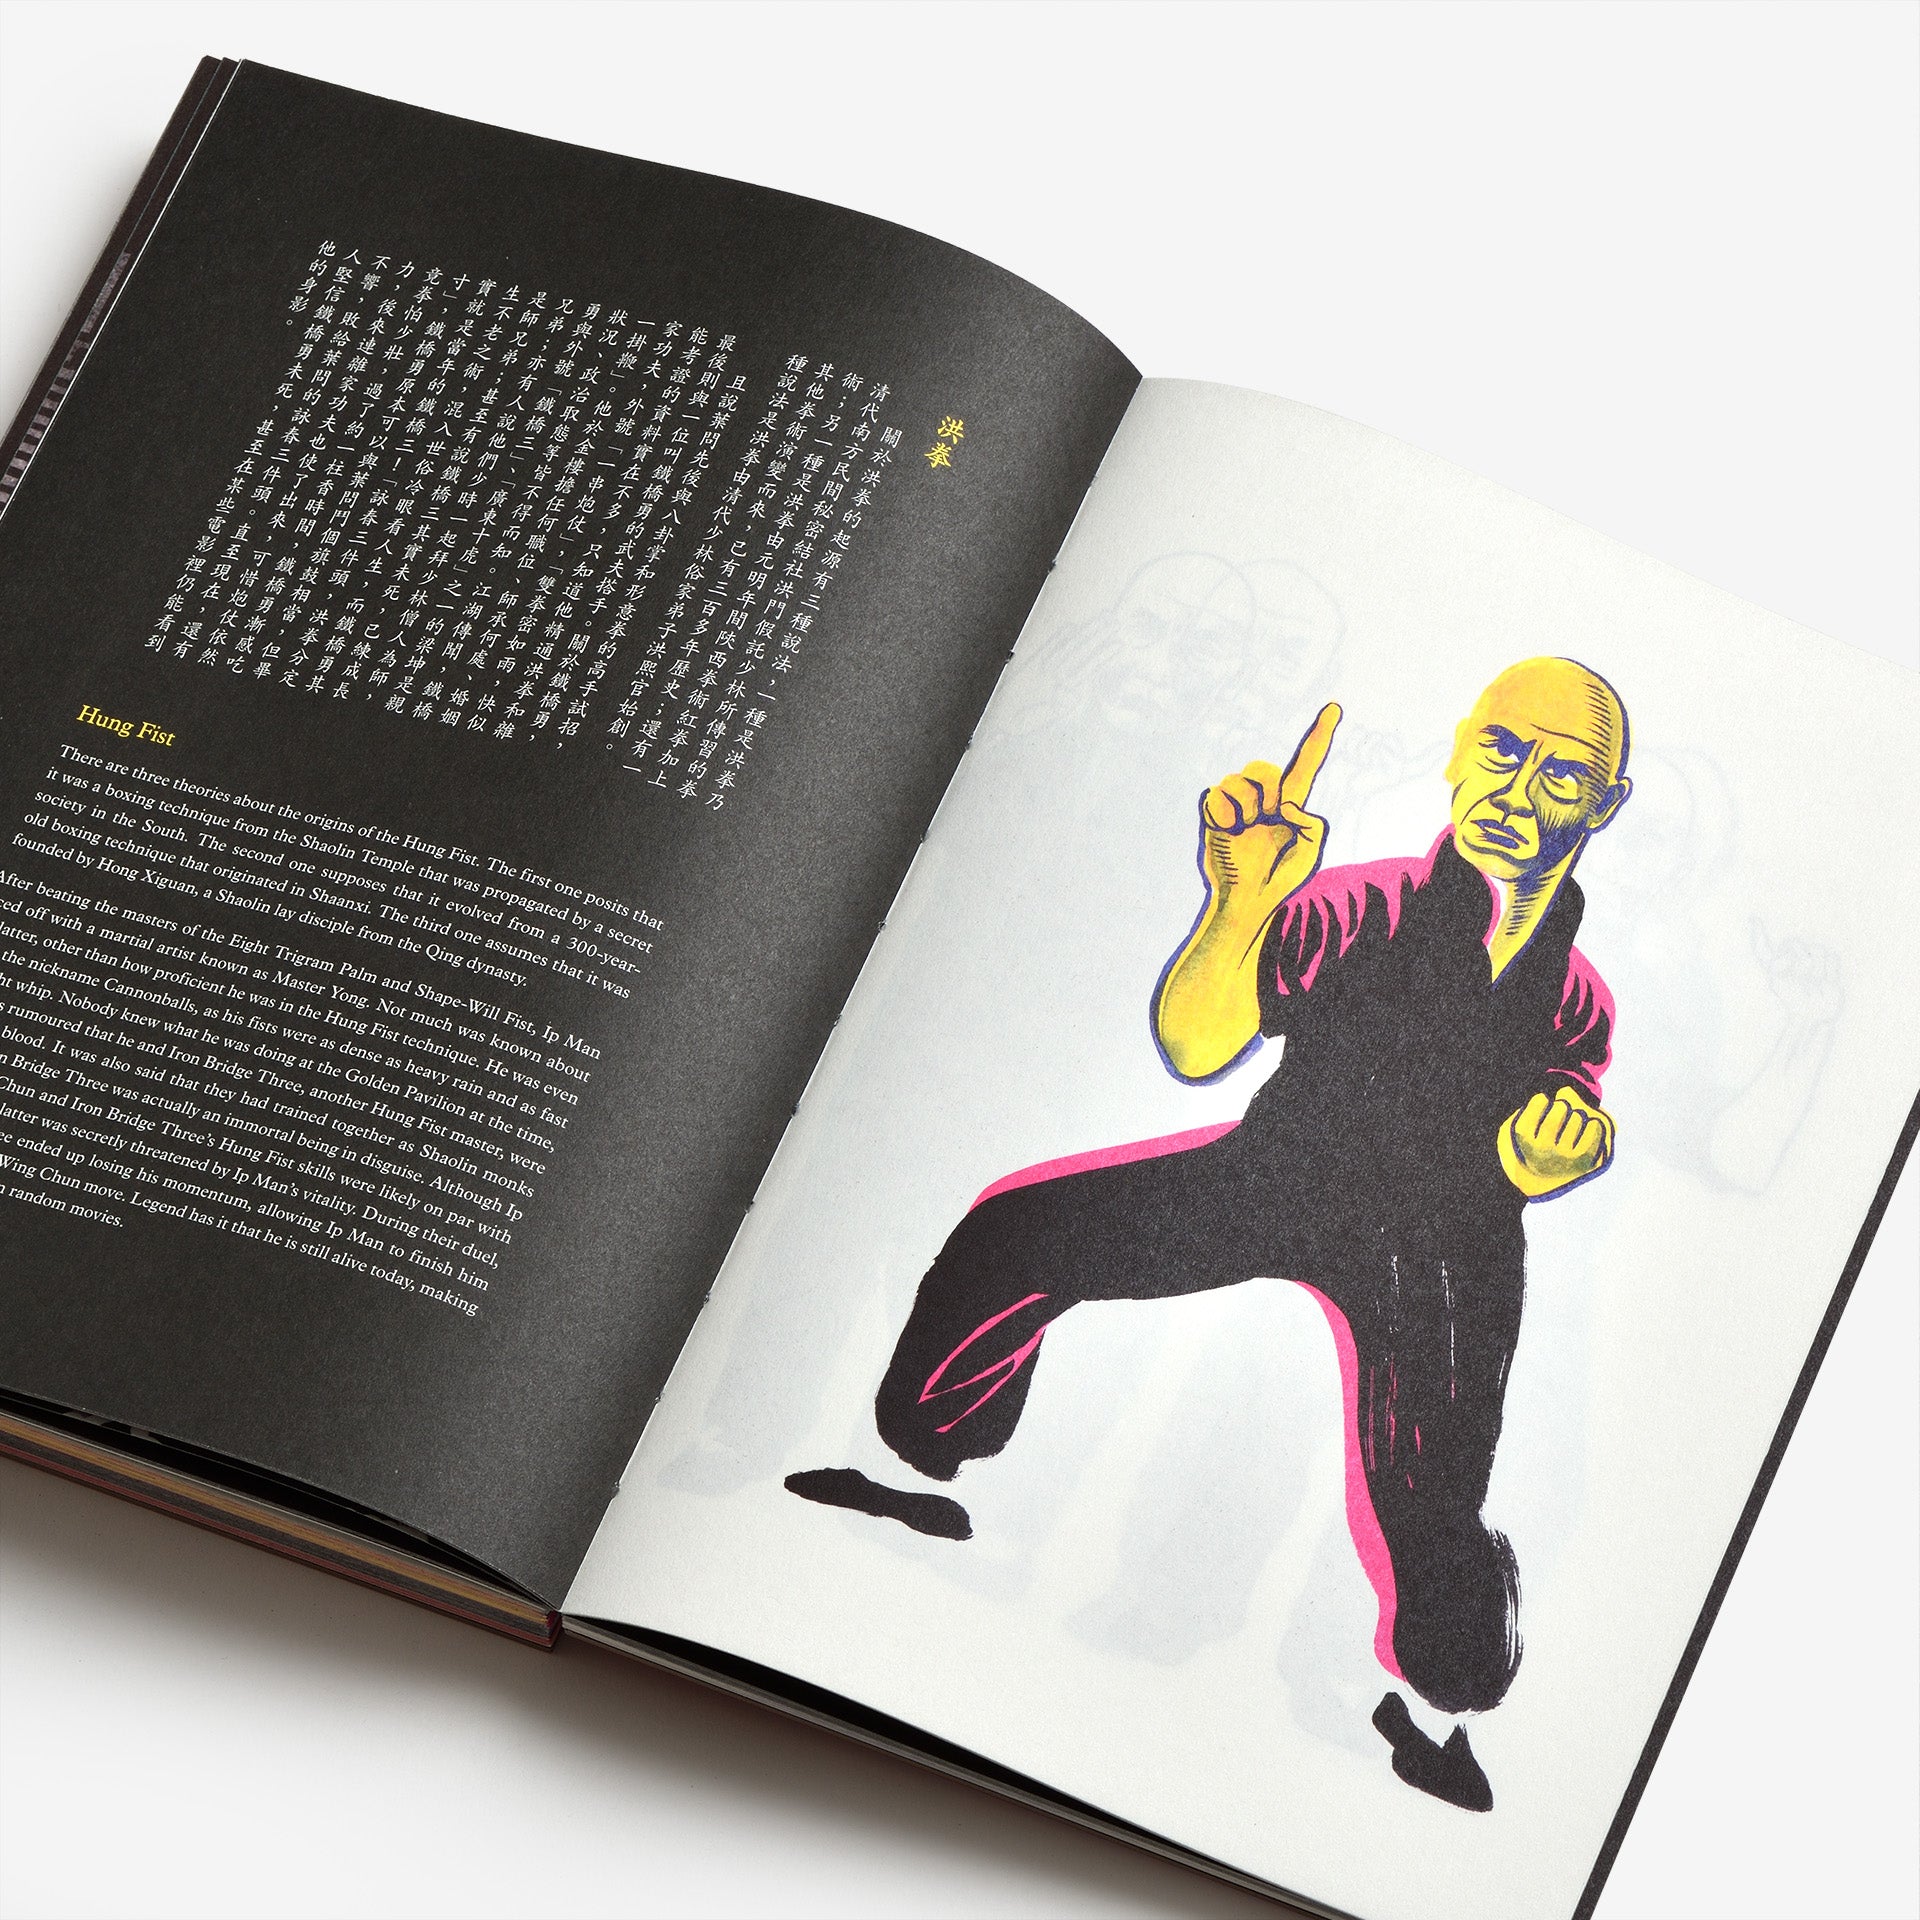 I Know Kung Fu: An Illustrated Tribute to Kung Fu Movies, Moves and Masters (Yellow)